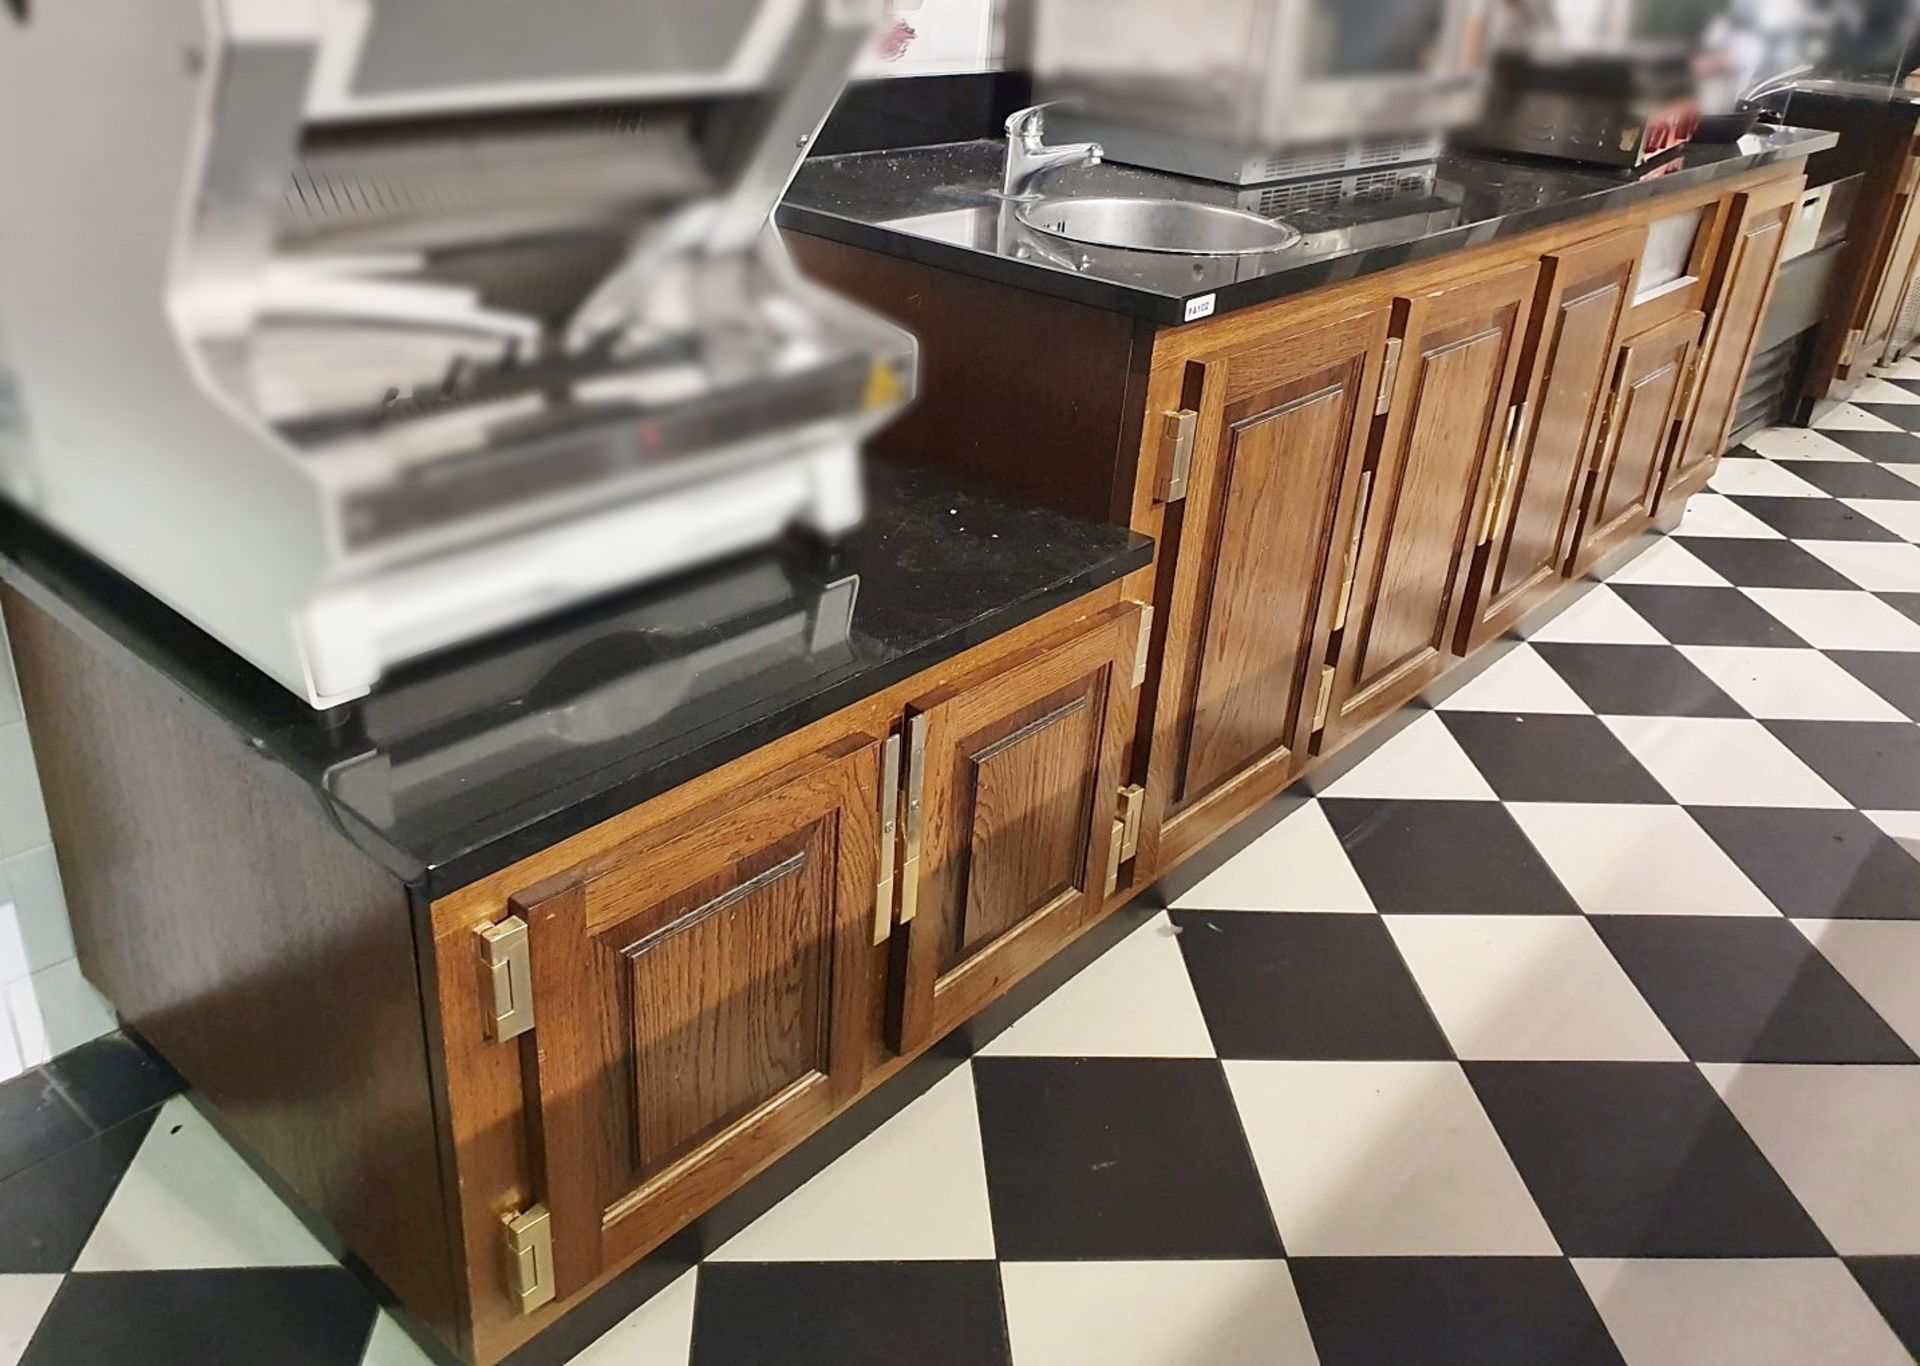 1 x Preparation Counter Unit With Oak Doors and Brass Hardware, Black Granite Work Surfaces and Hand